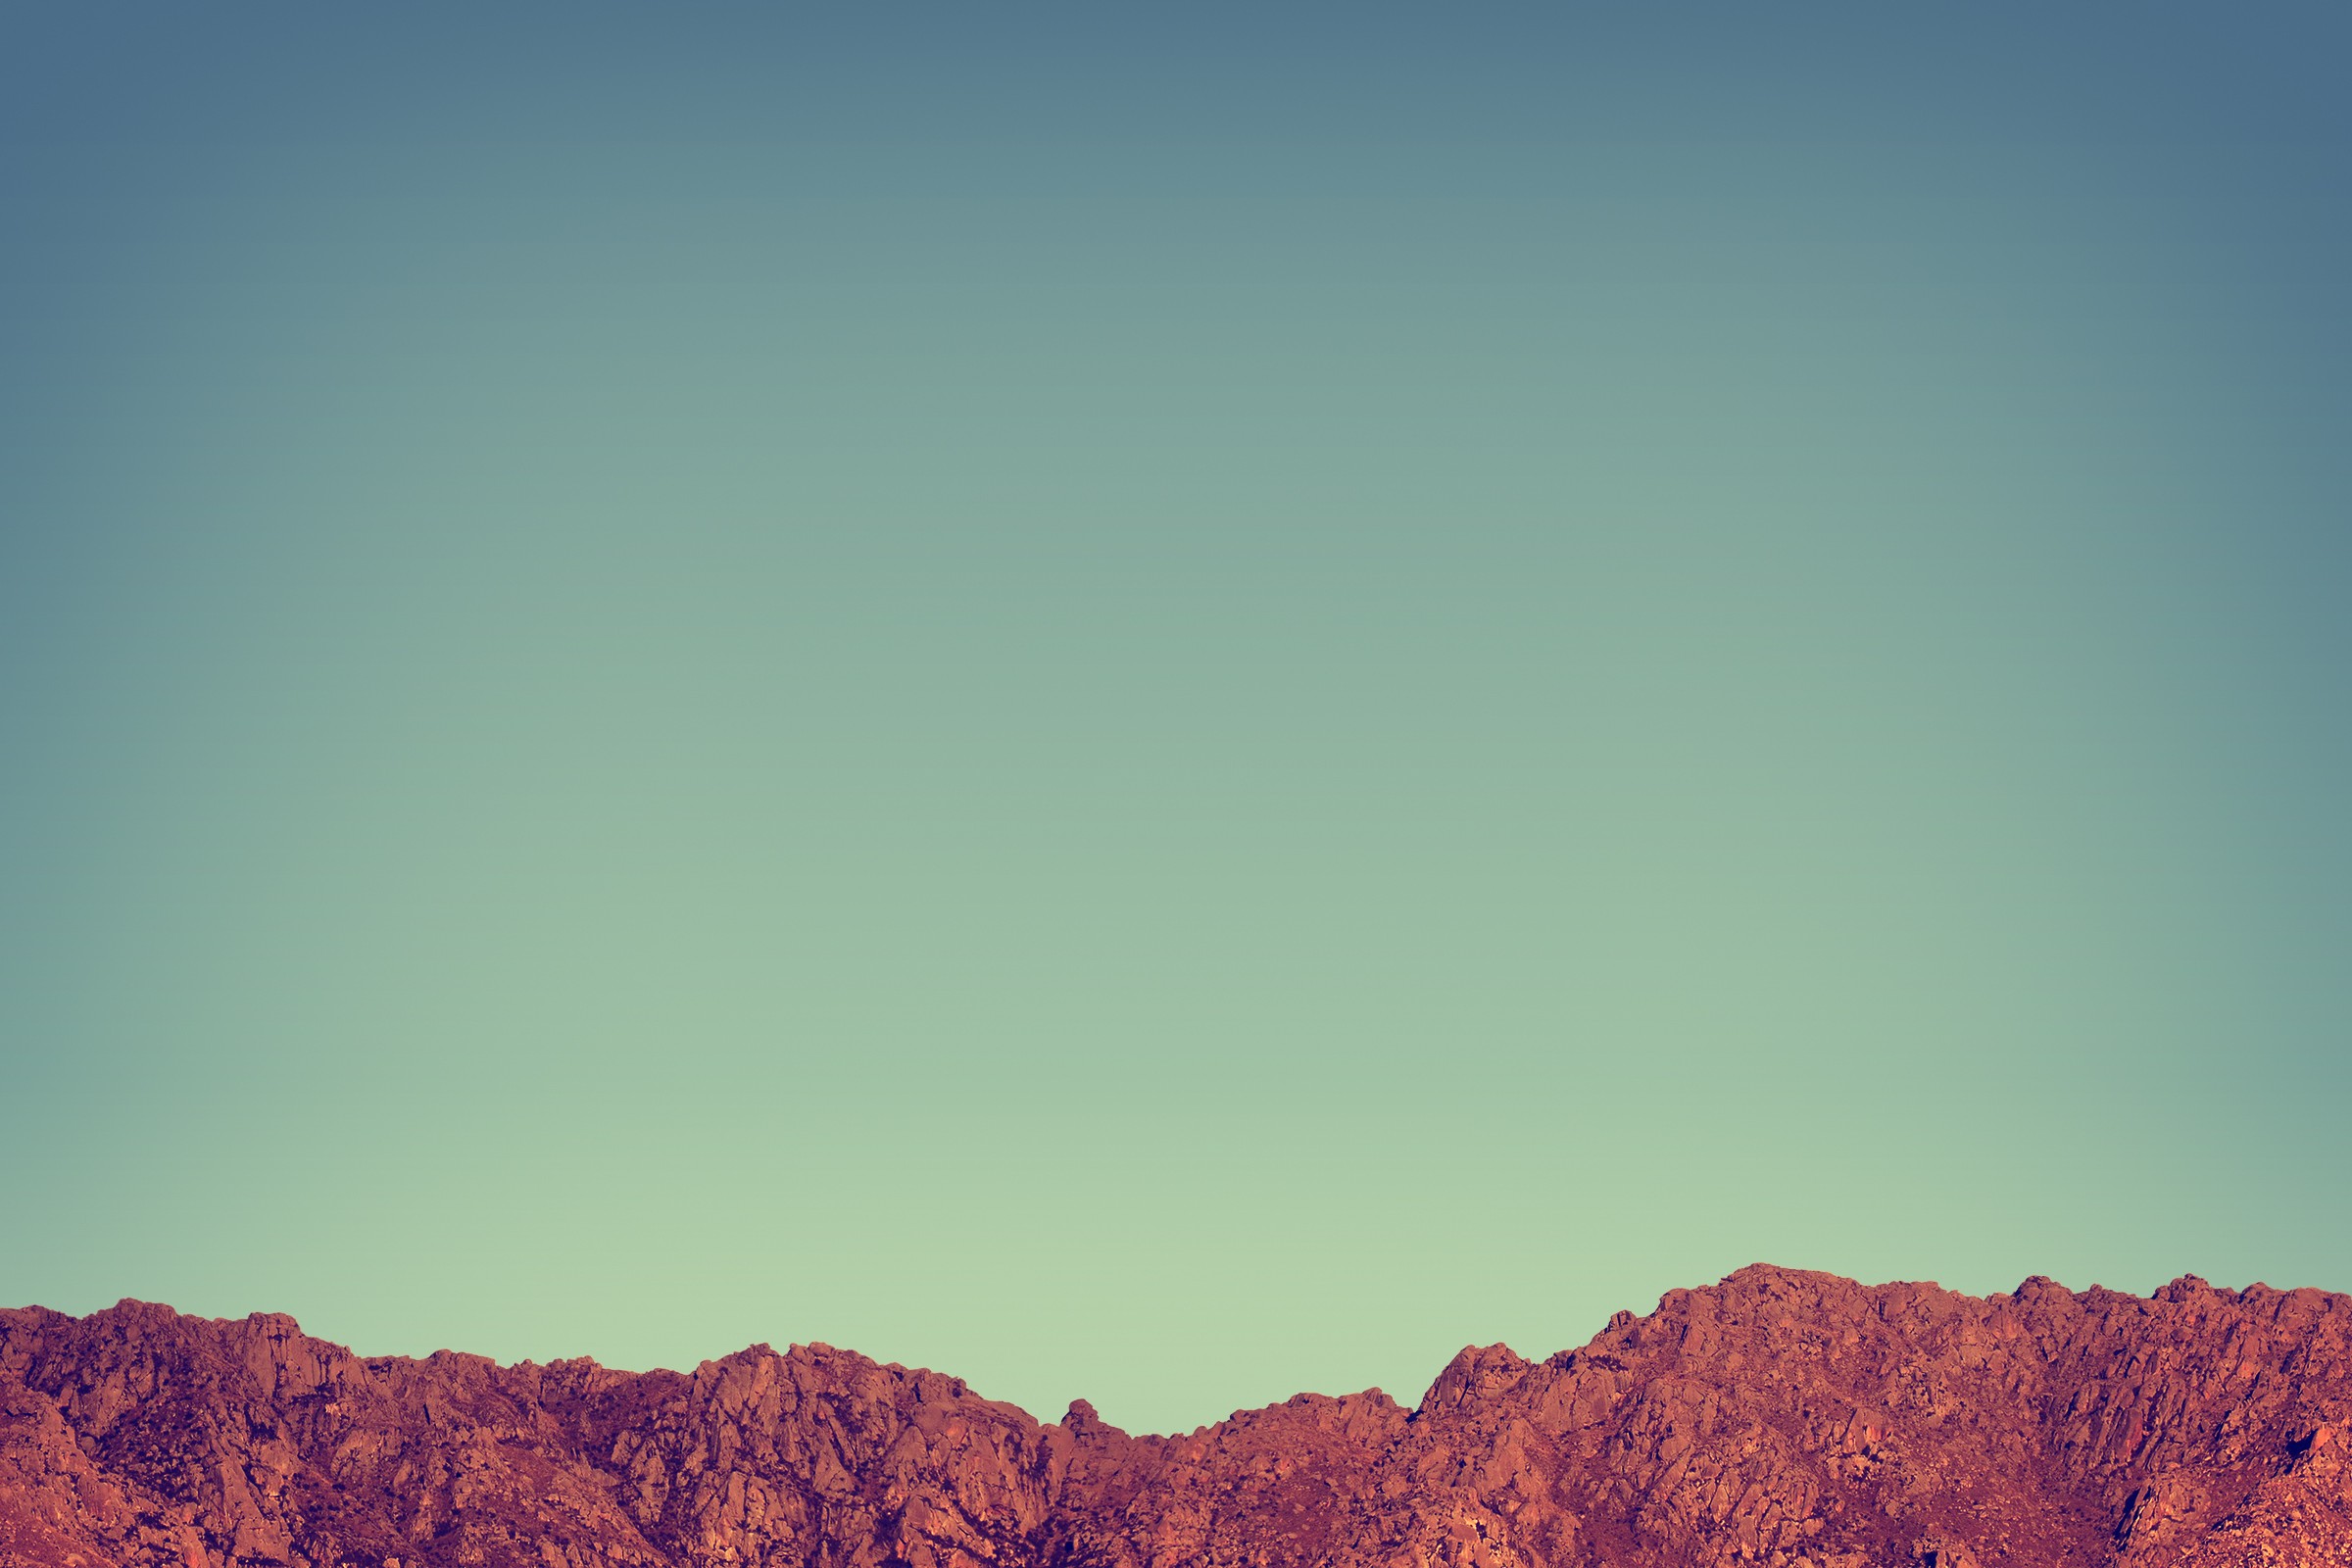 General 2400x1600 mountains nature clear sky blue